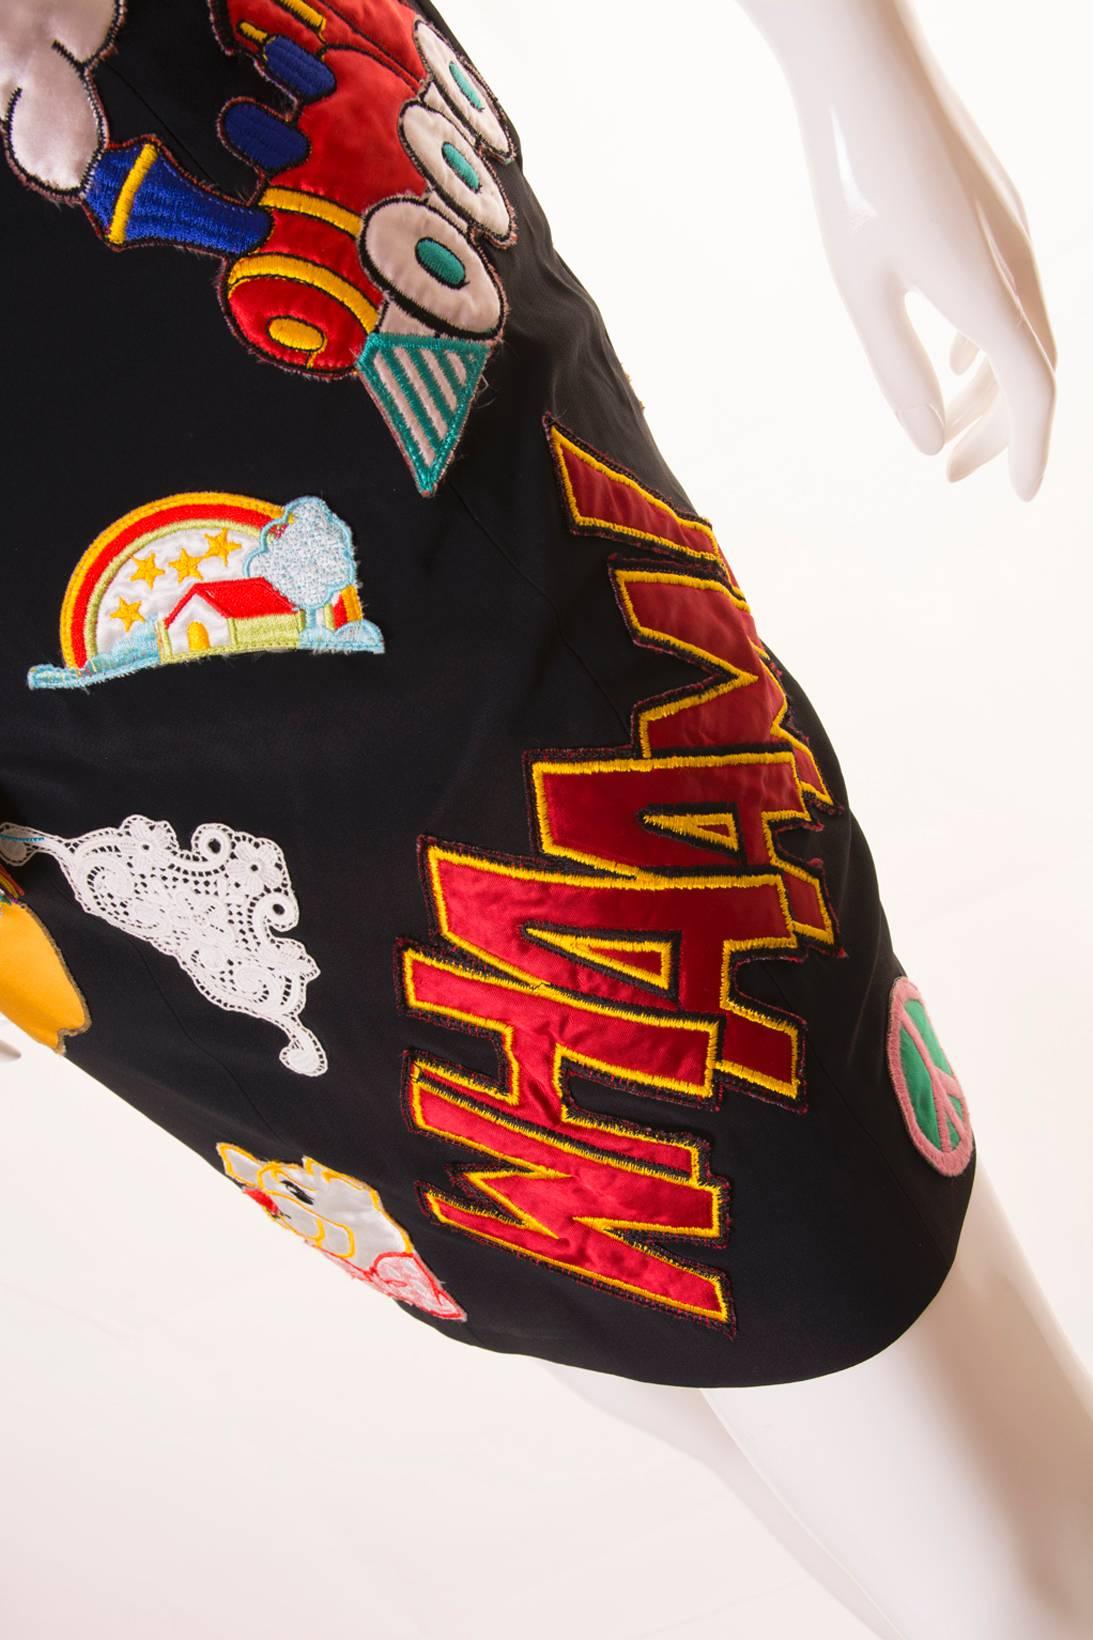 Documented Franco Moschino S/S 1988 Patch Dress 2